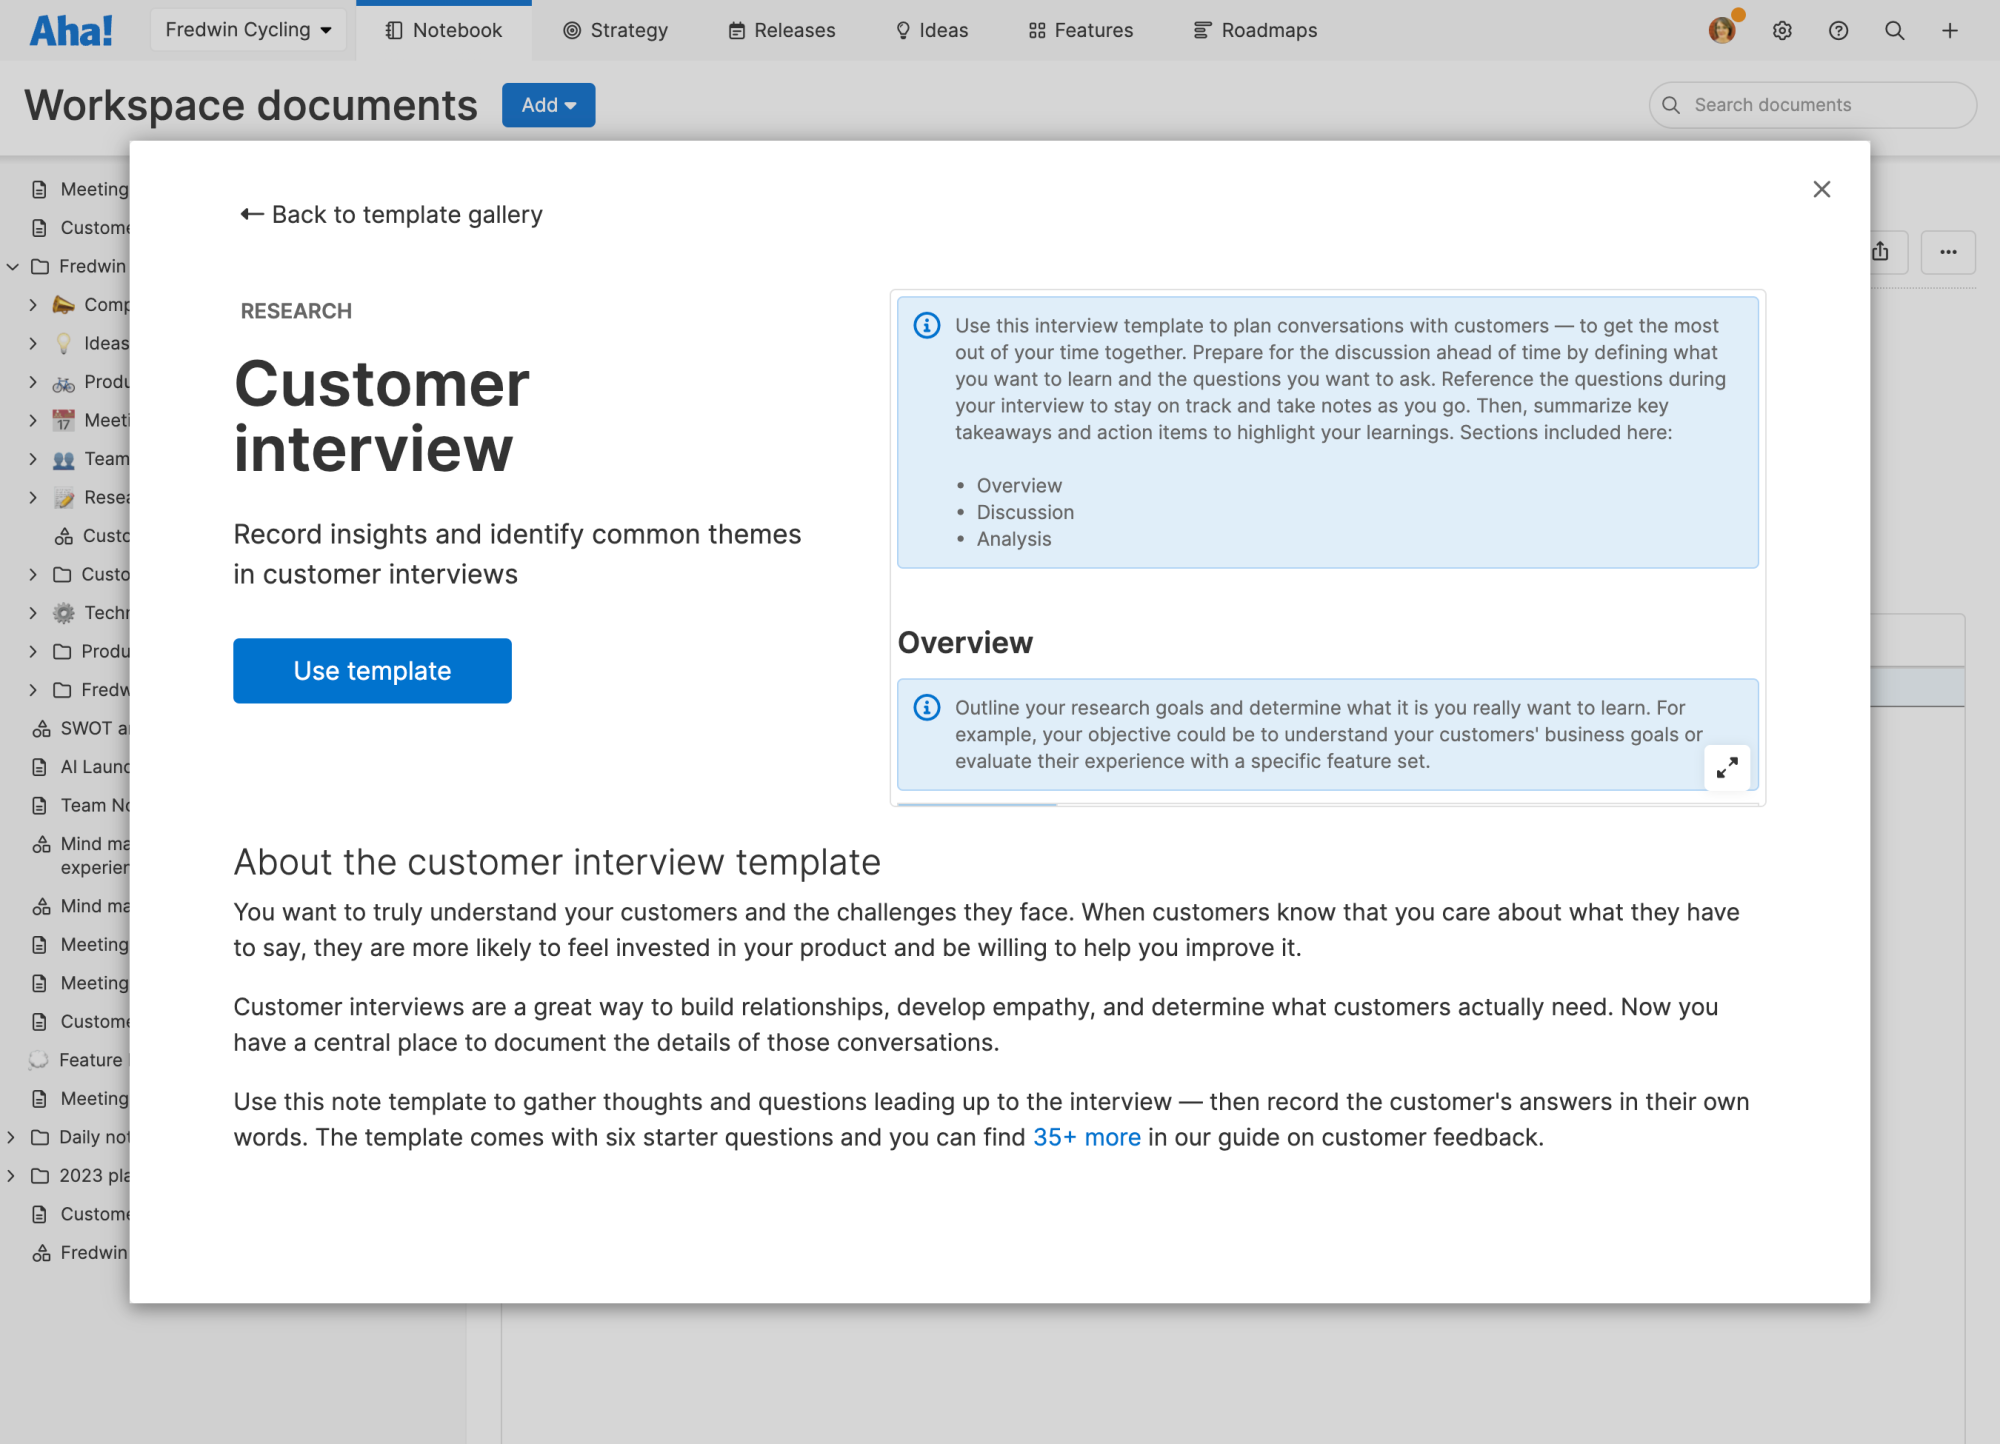 customer interview note template in Aha! template library